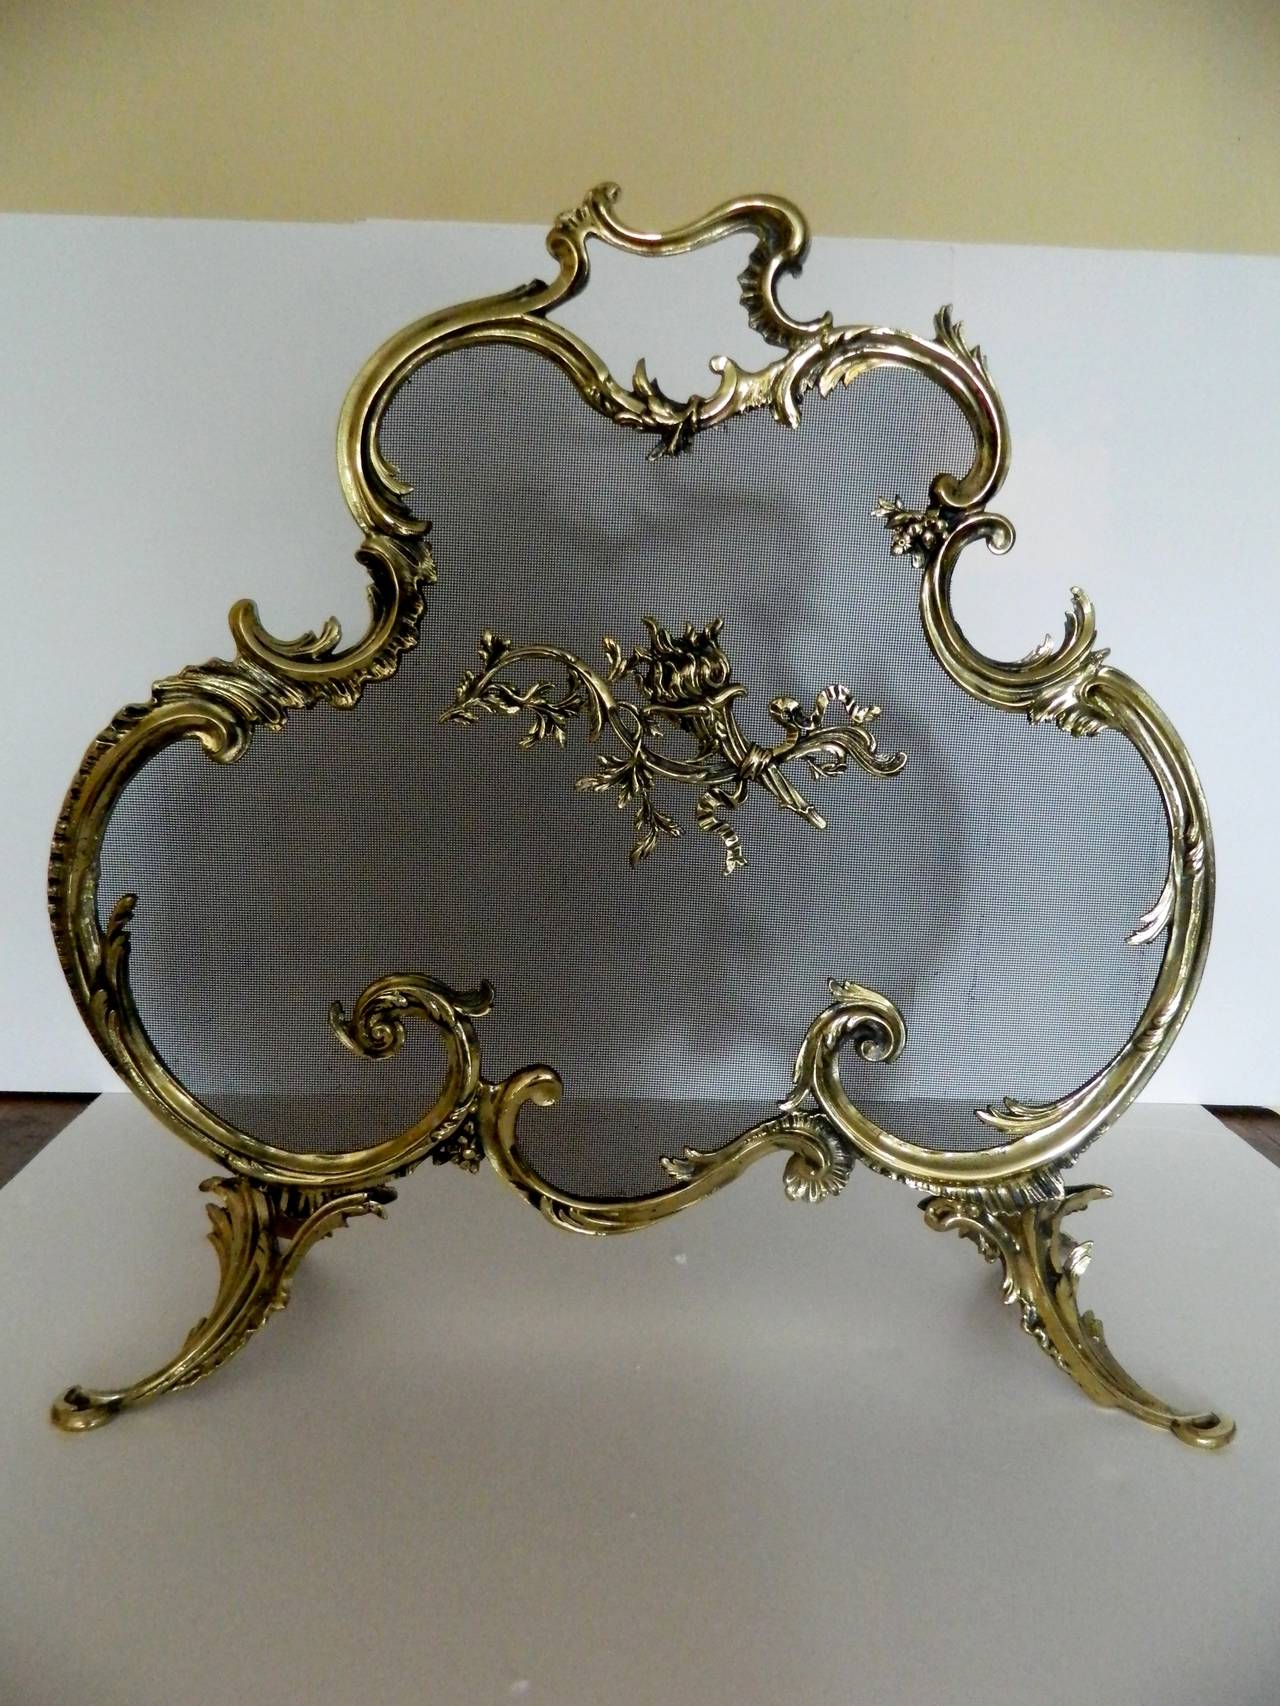 19th Century French Polished Brass Fire Screen Adorned with a Fire Cheriot in the Center.  Professionally cleaned and polished